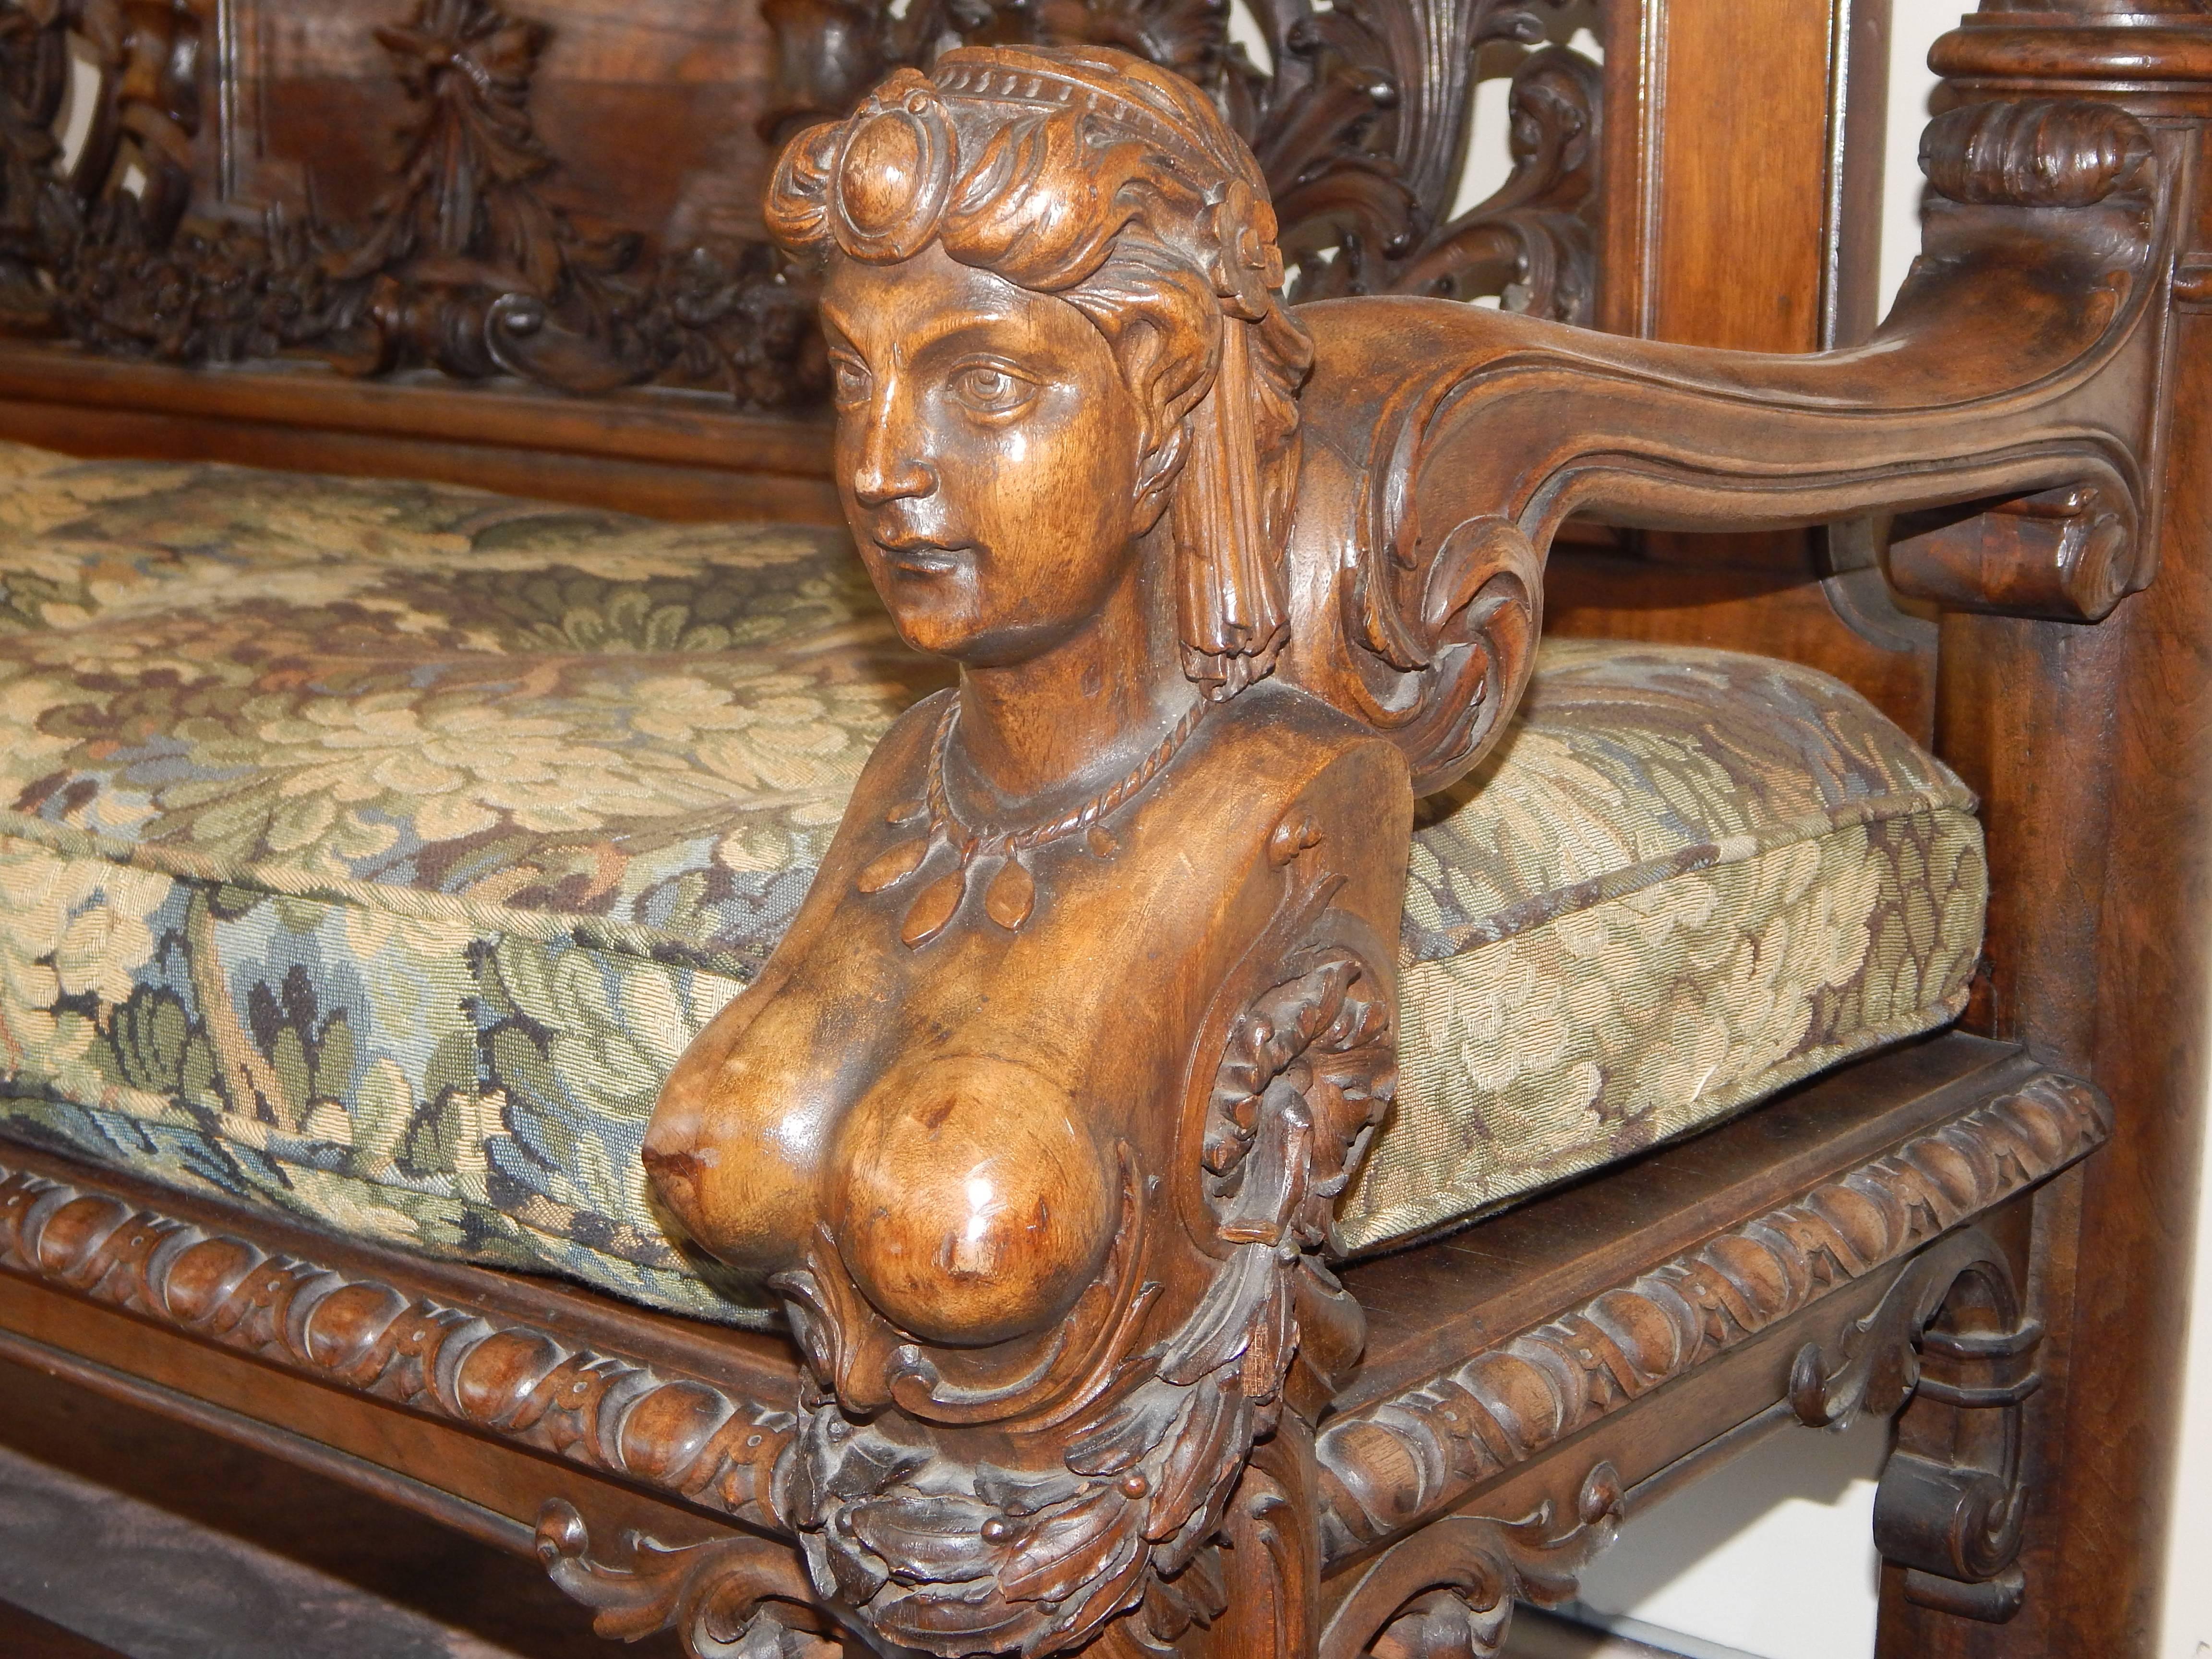 A magnificent large carved walnut settee, or hall bench, featuring ladies heads,
cupids and wreaths. Excellent carving and wonderful patina.